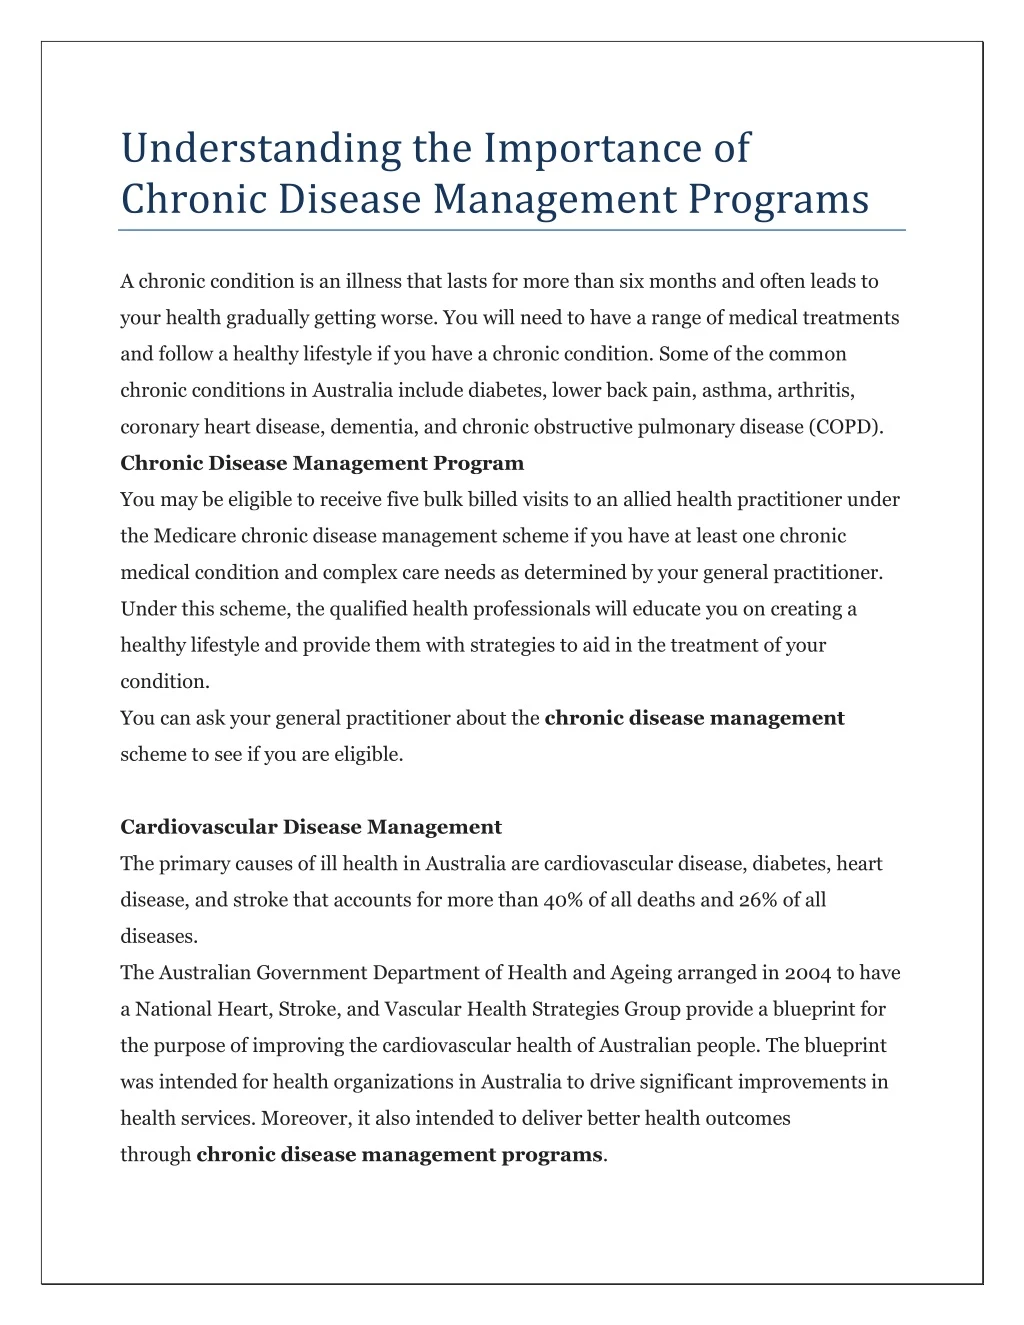 understanding the importance of chronic disease